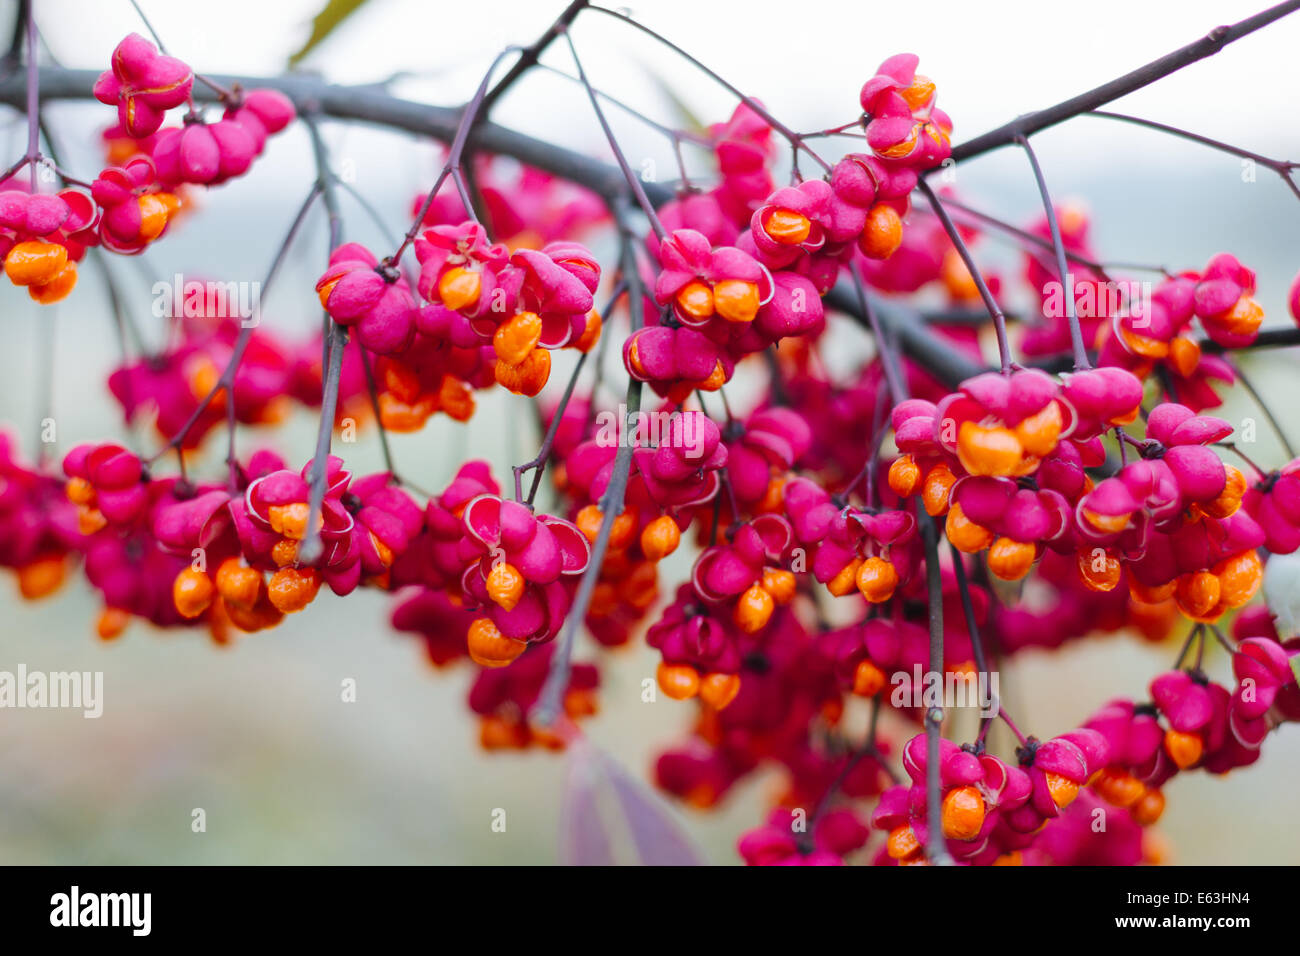 Berberis seeds at bloom on a branch Stock Photo